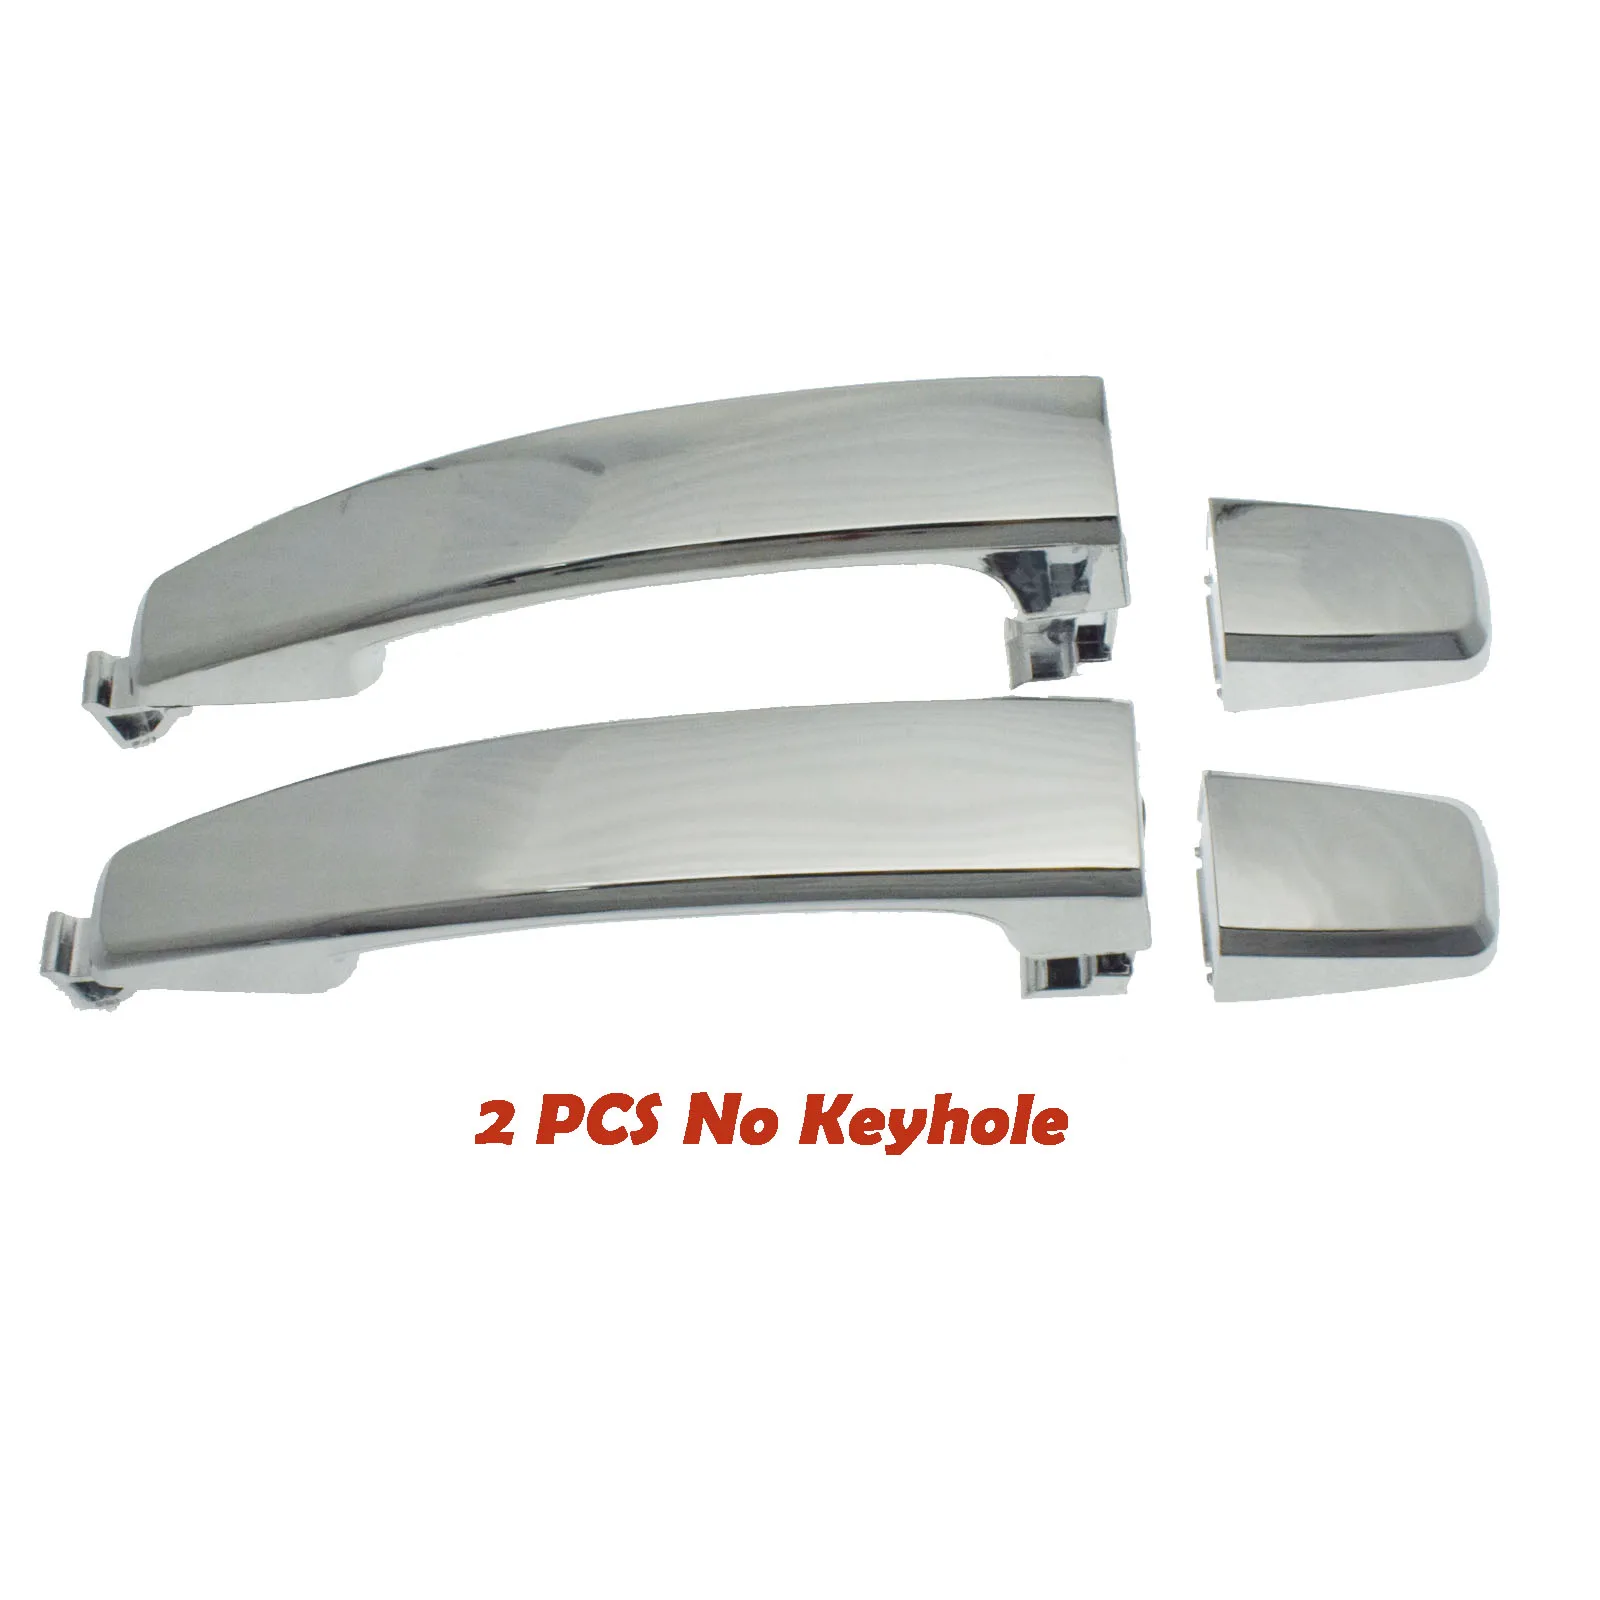 1/2/4 pcs Front Left with keyhole Front Right/Rear Chrome ABS Door